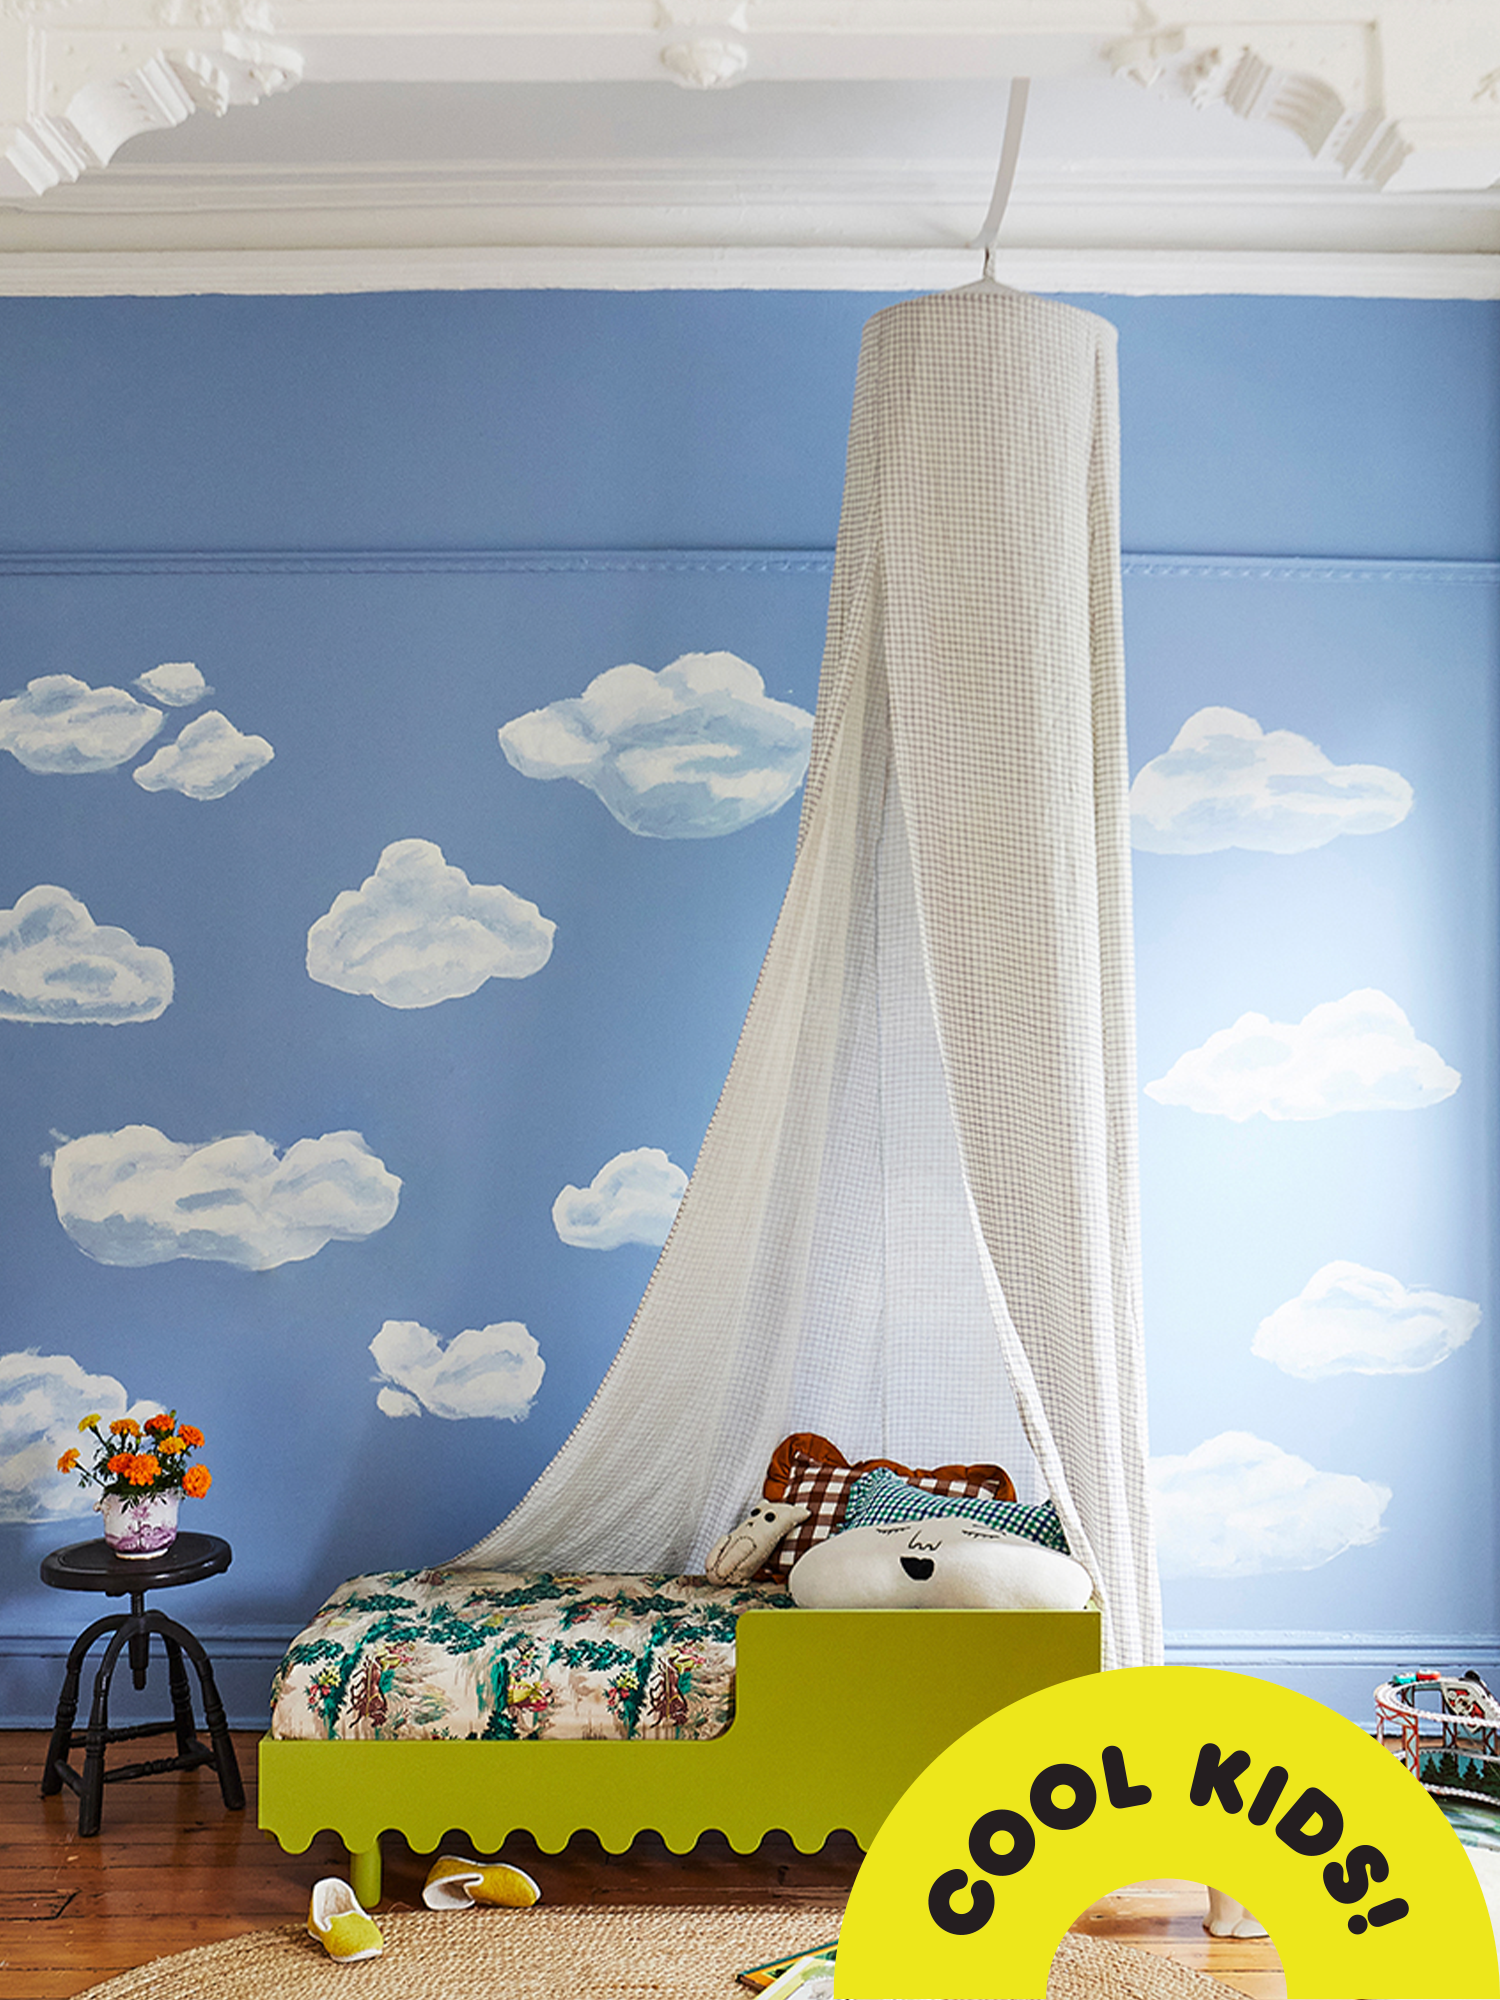 Oeuf's Moss Toddler bed in peapod green in bedroom with a canopy and walls painted with clouds